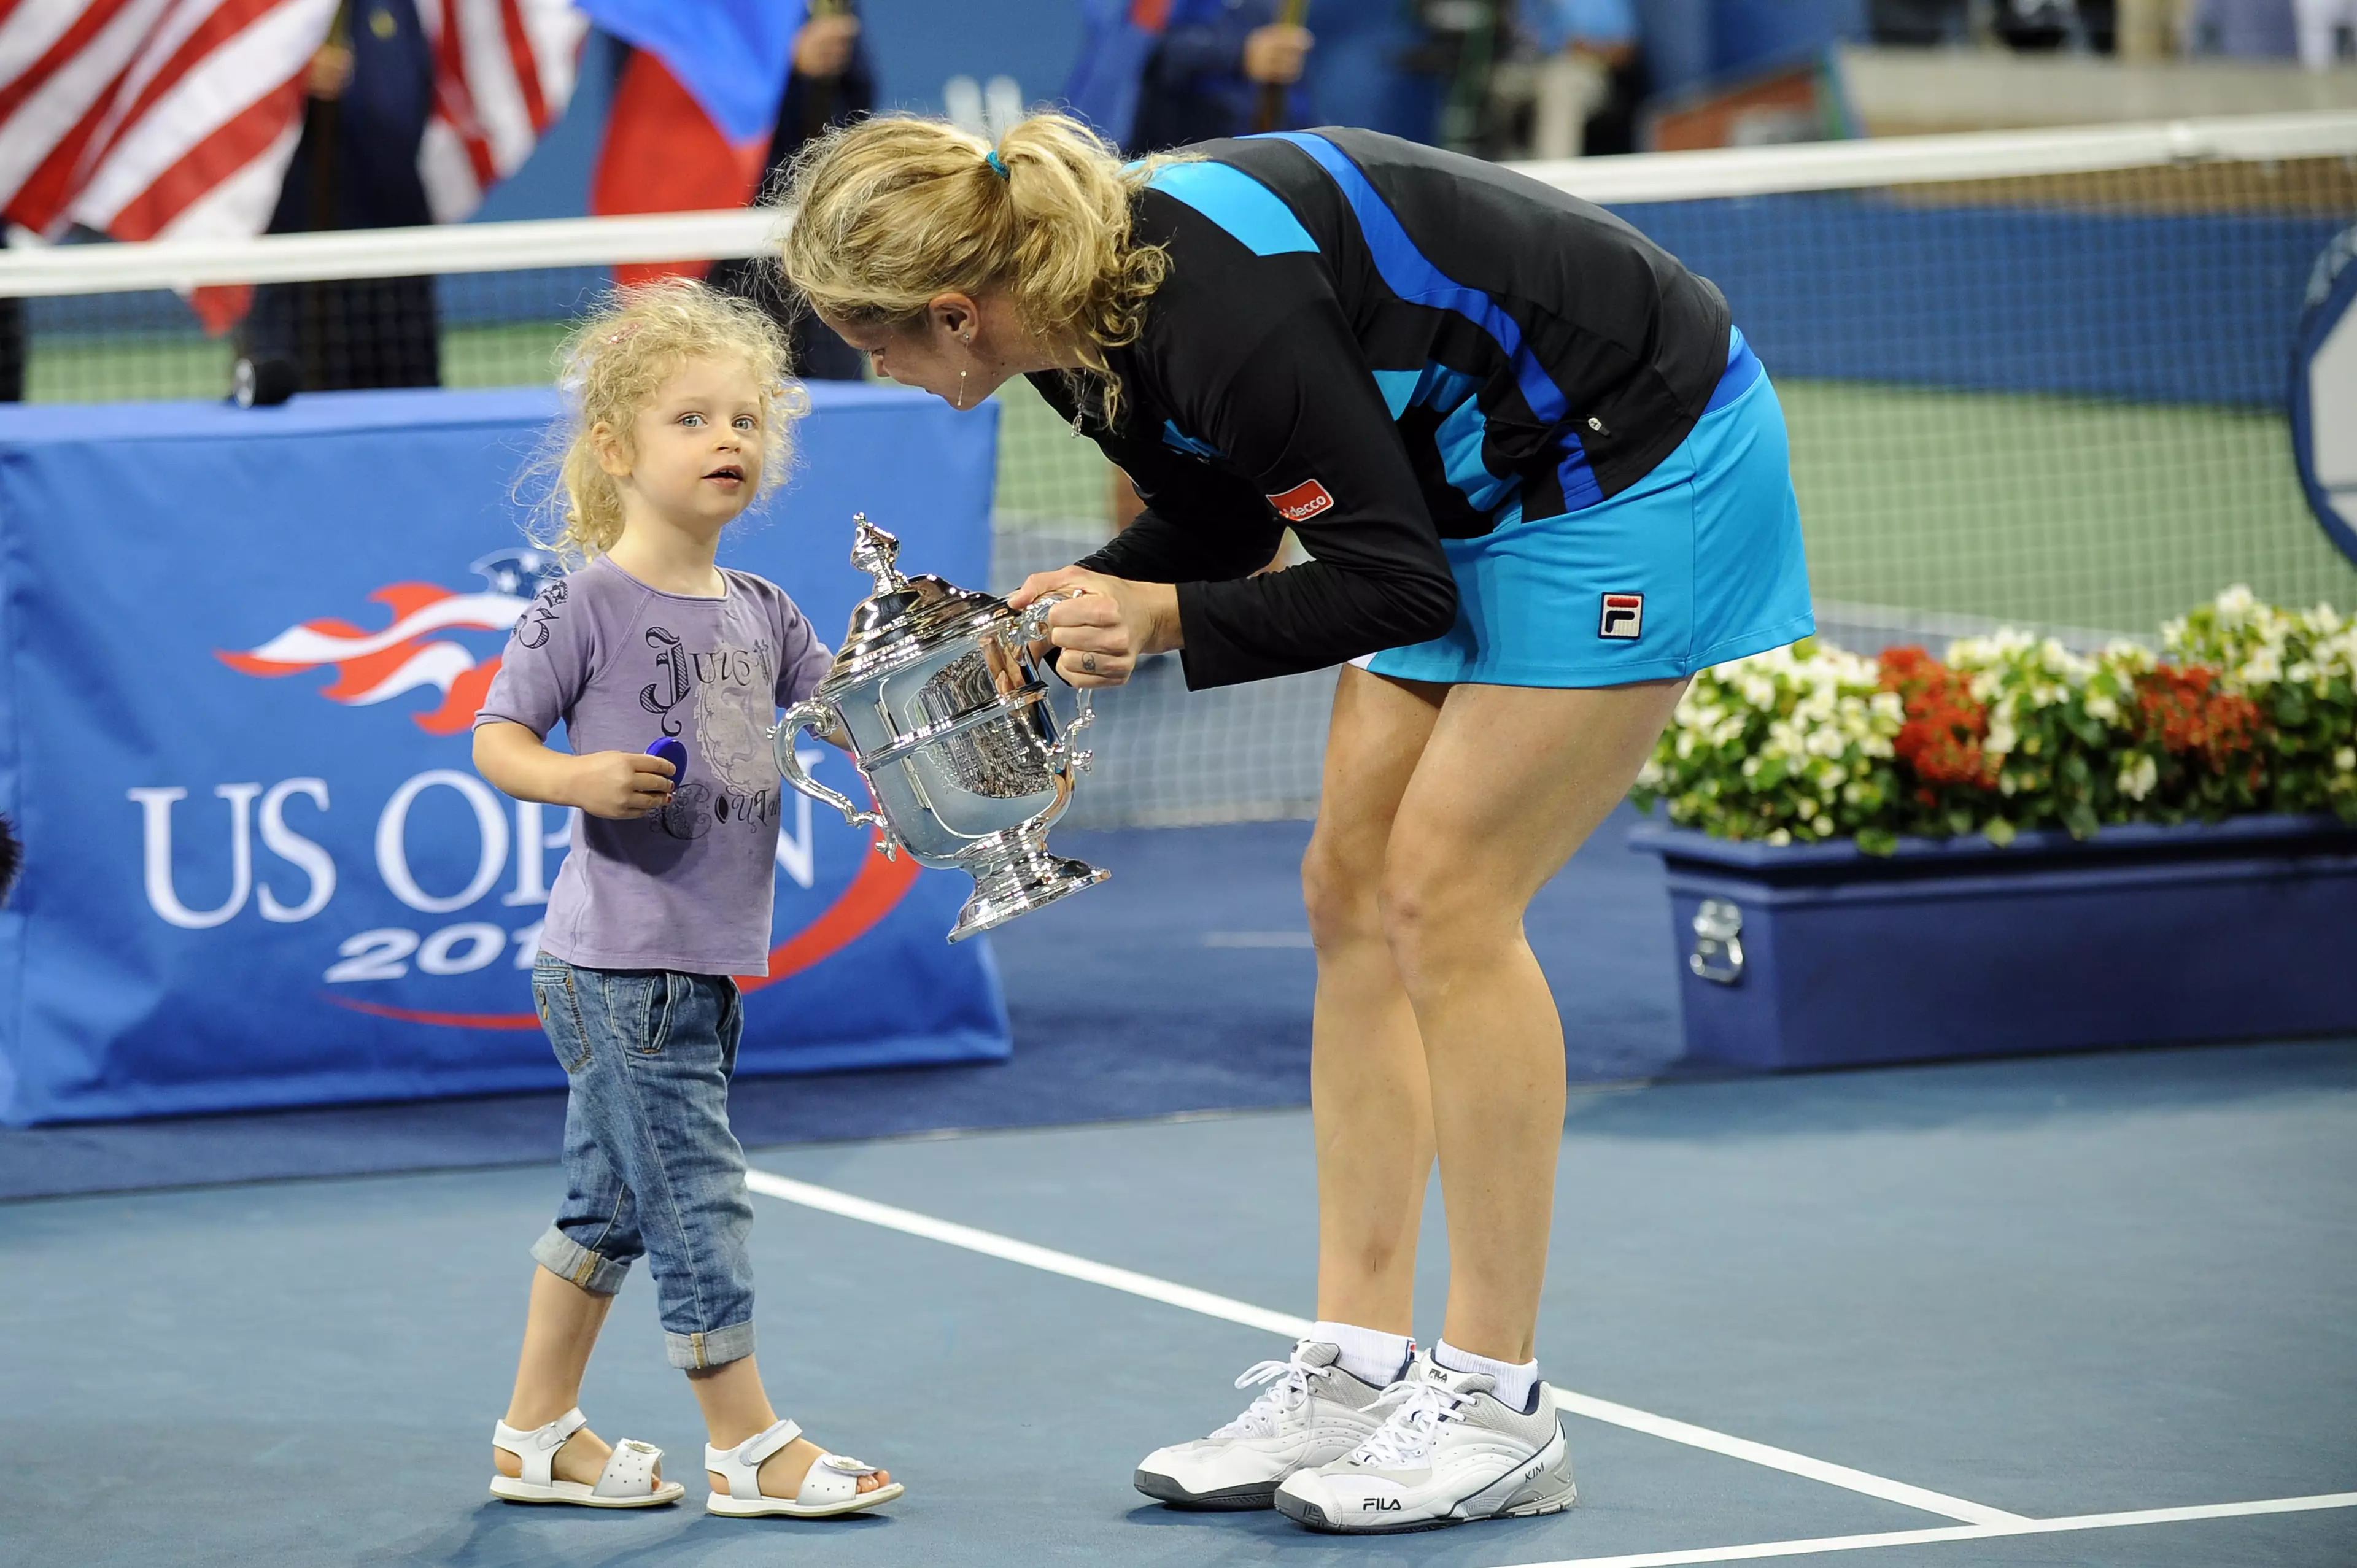 Clijsters is pictured with her daughter after winning the US Open. Credit PA